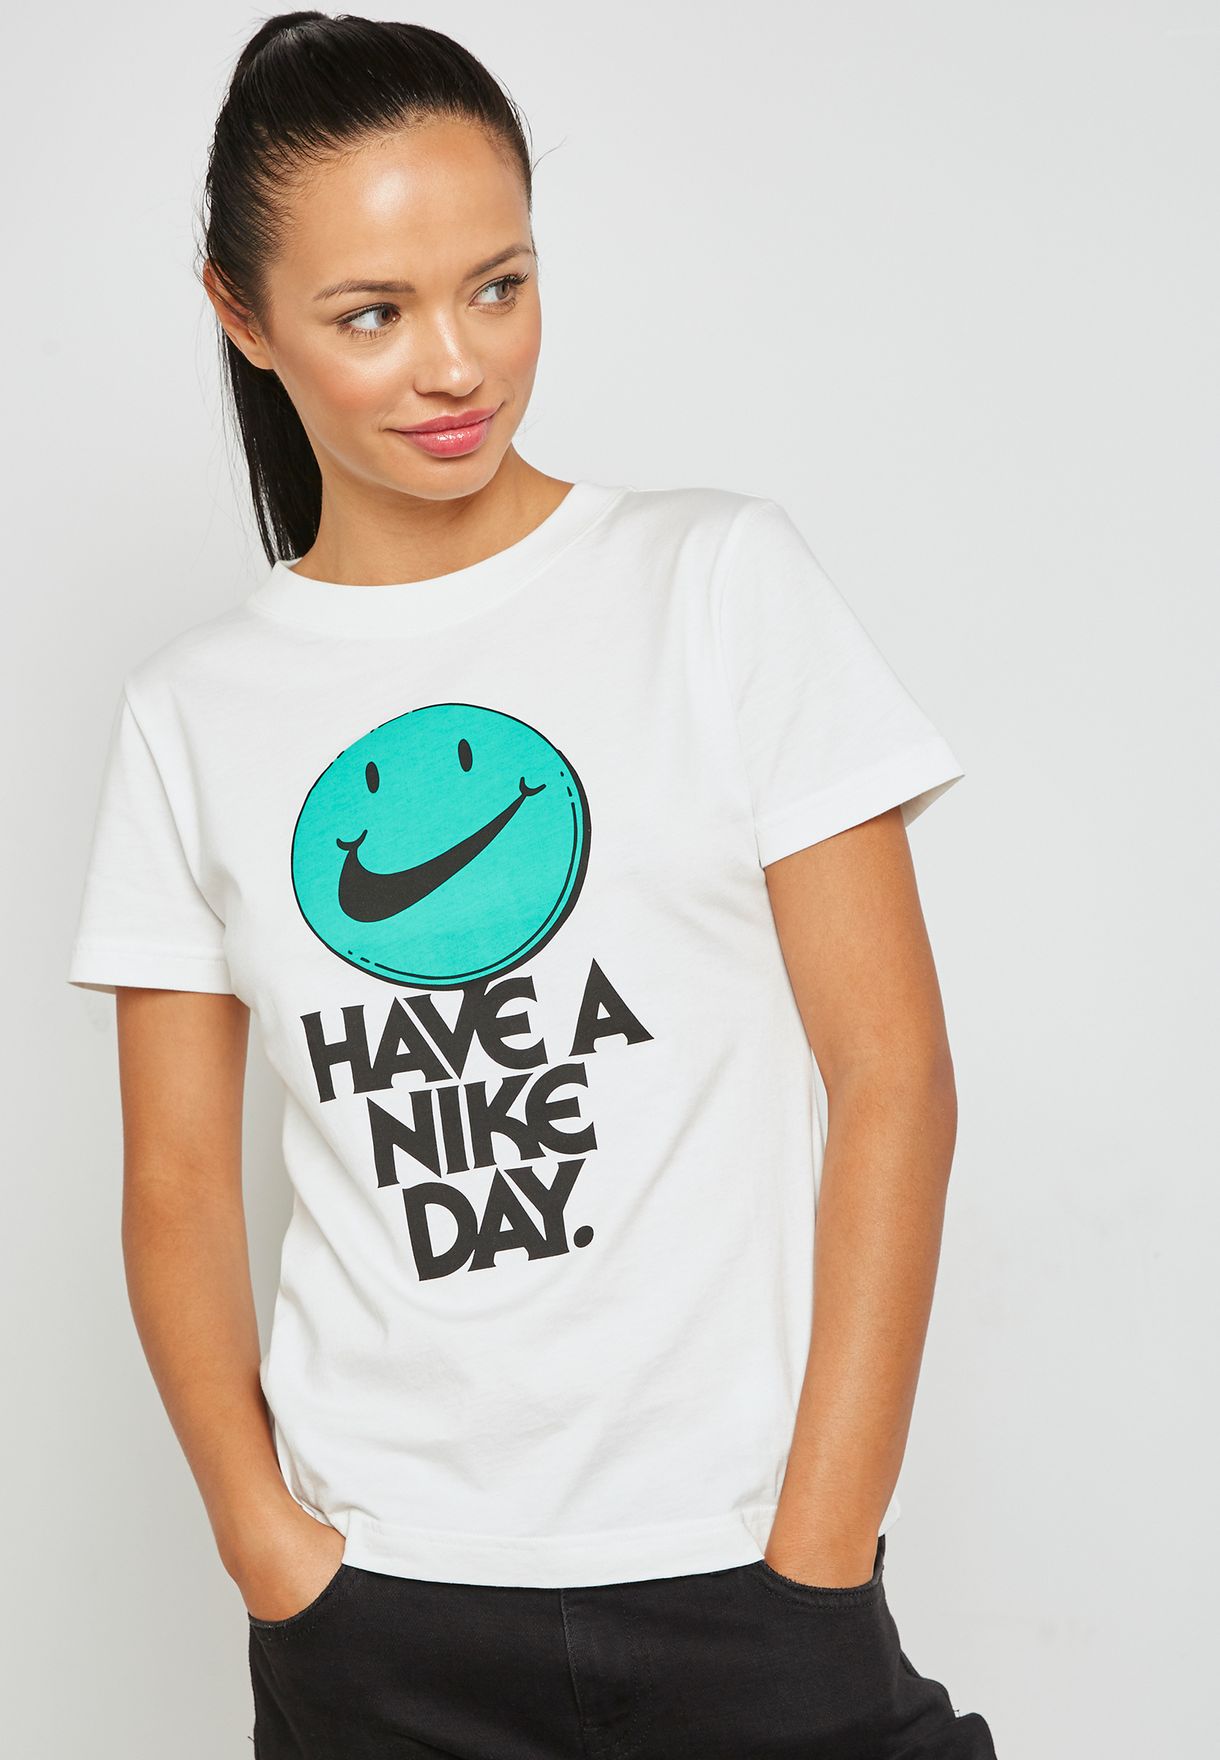 nike have a nice day shirt